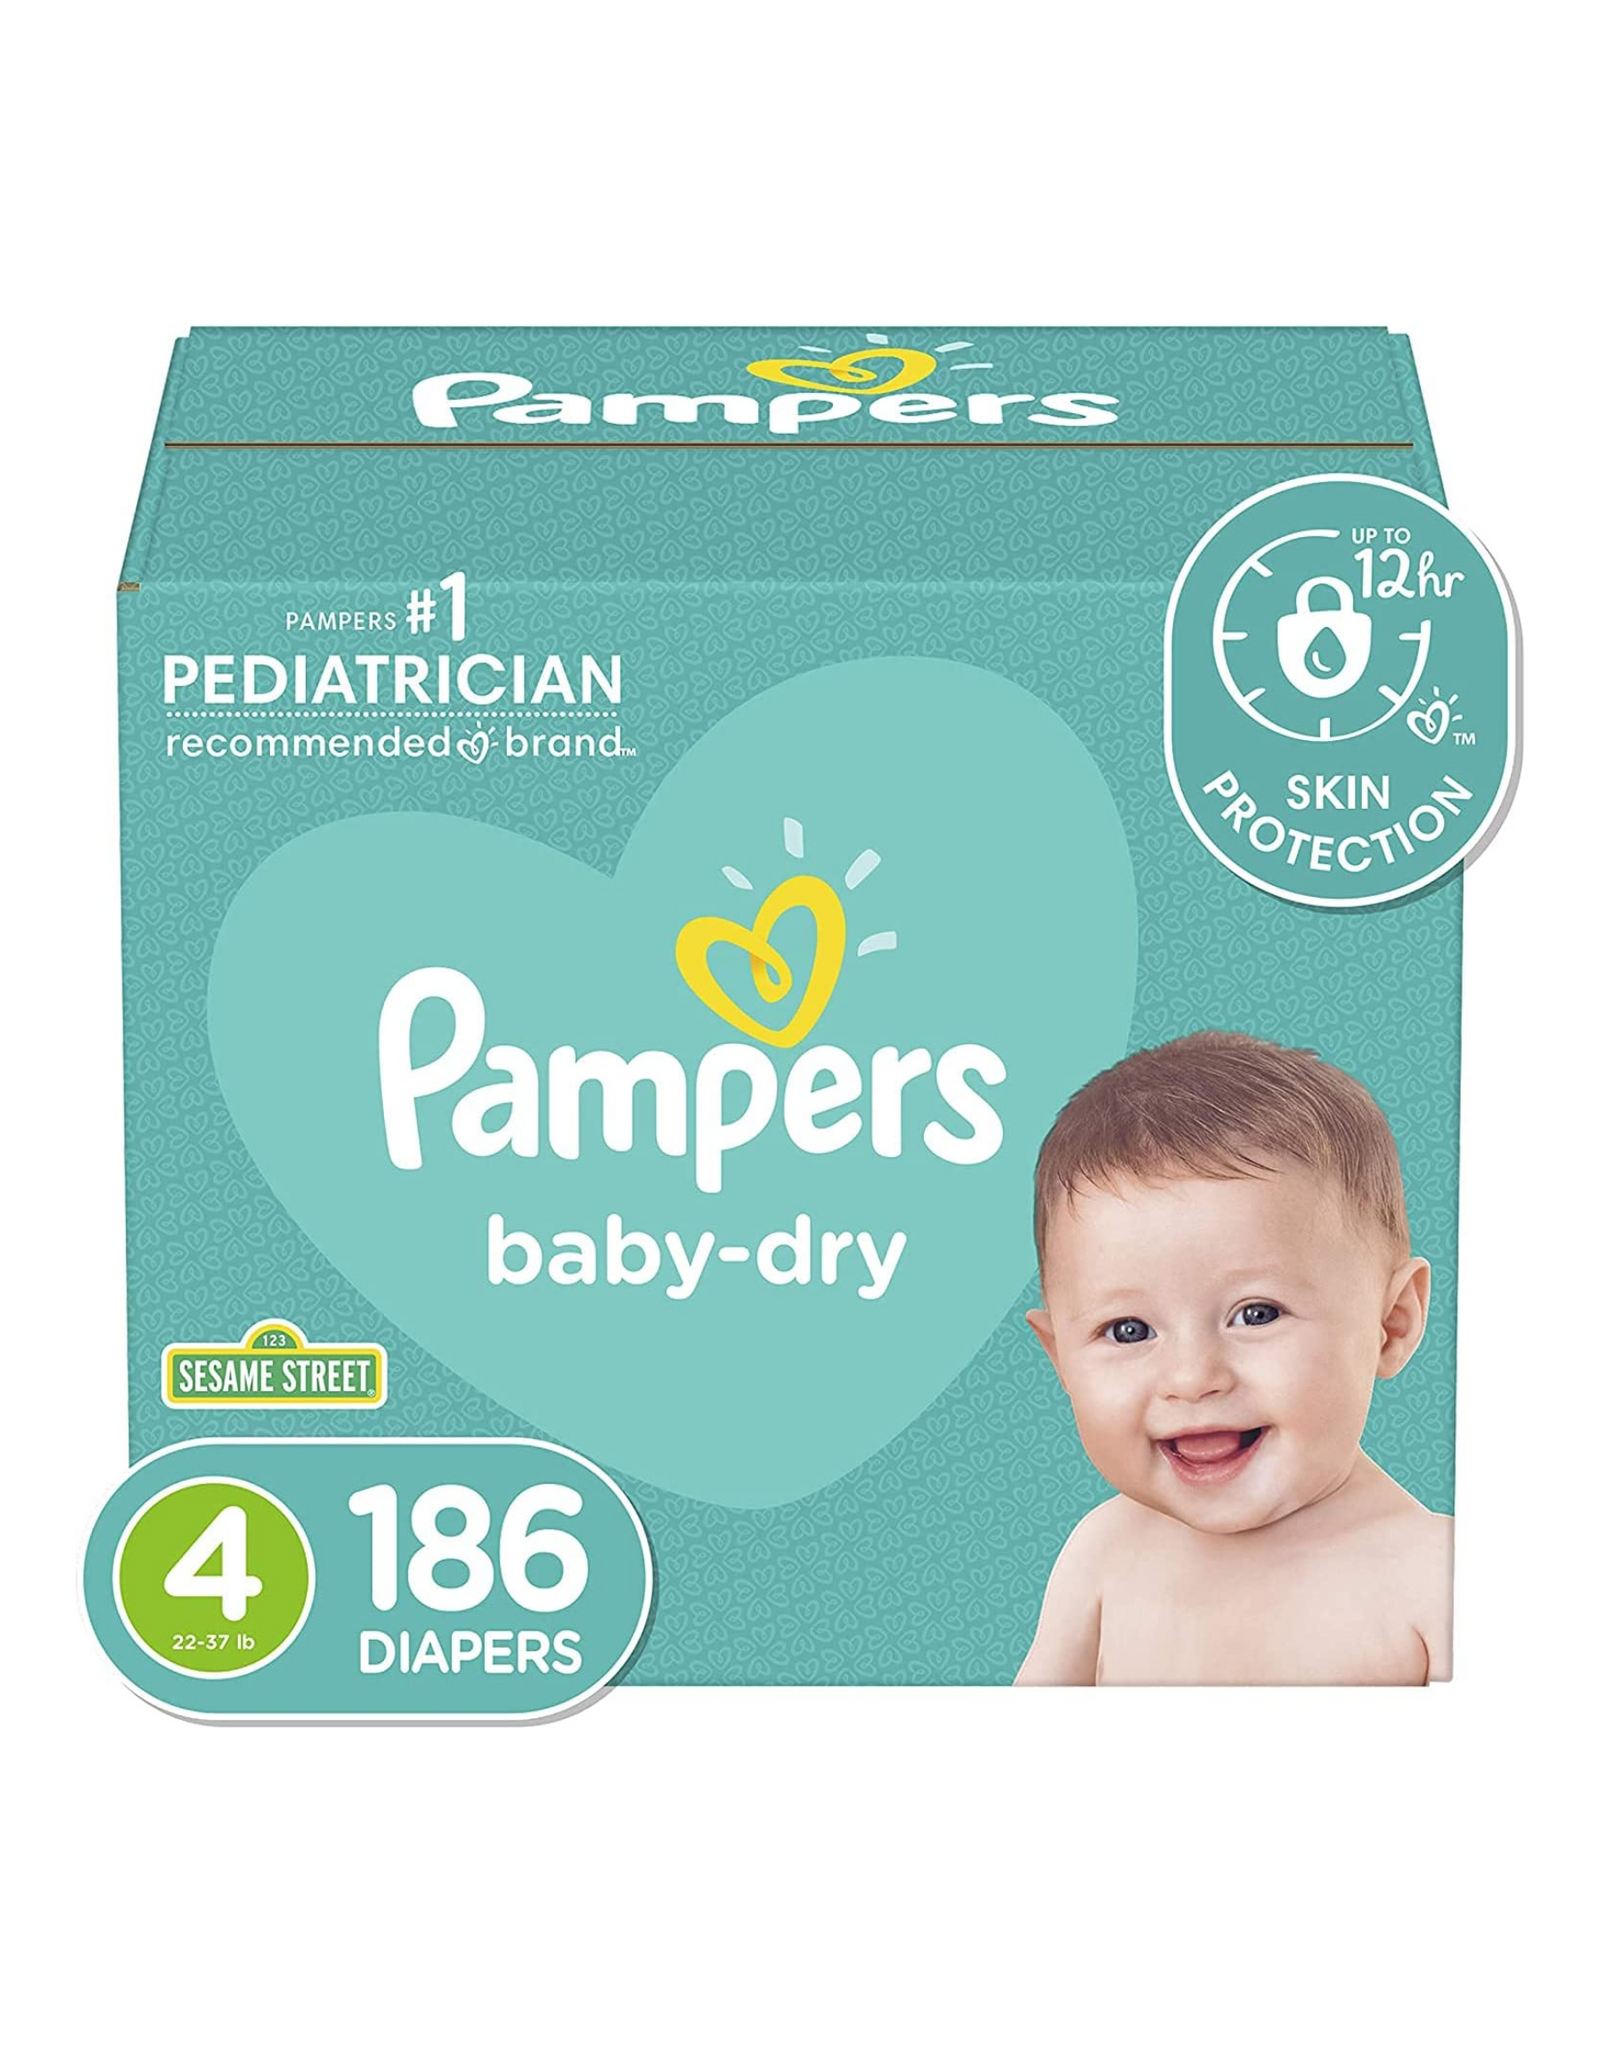 Diapers Size 4, 186 Count - Pampers Baby Dry Disposable Baby Diapers, Packaging & Prints May Vary